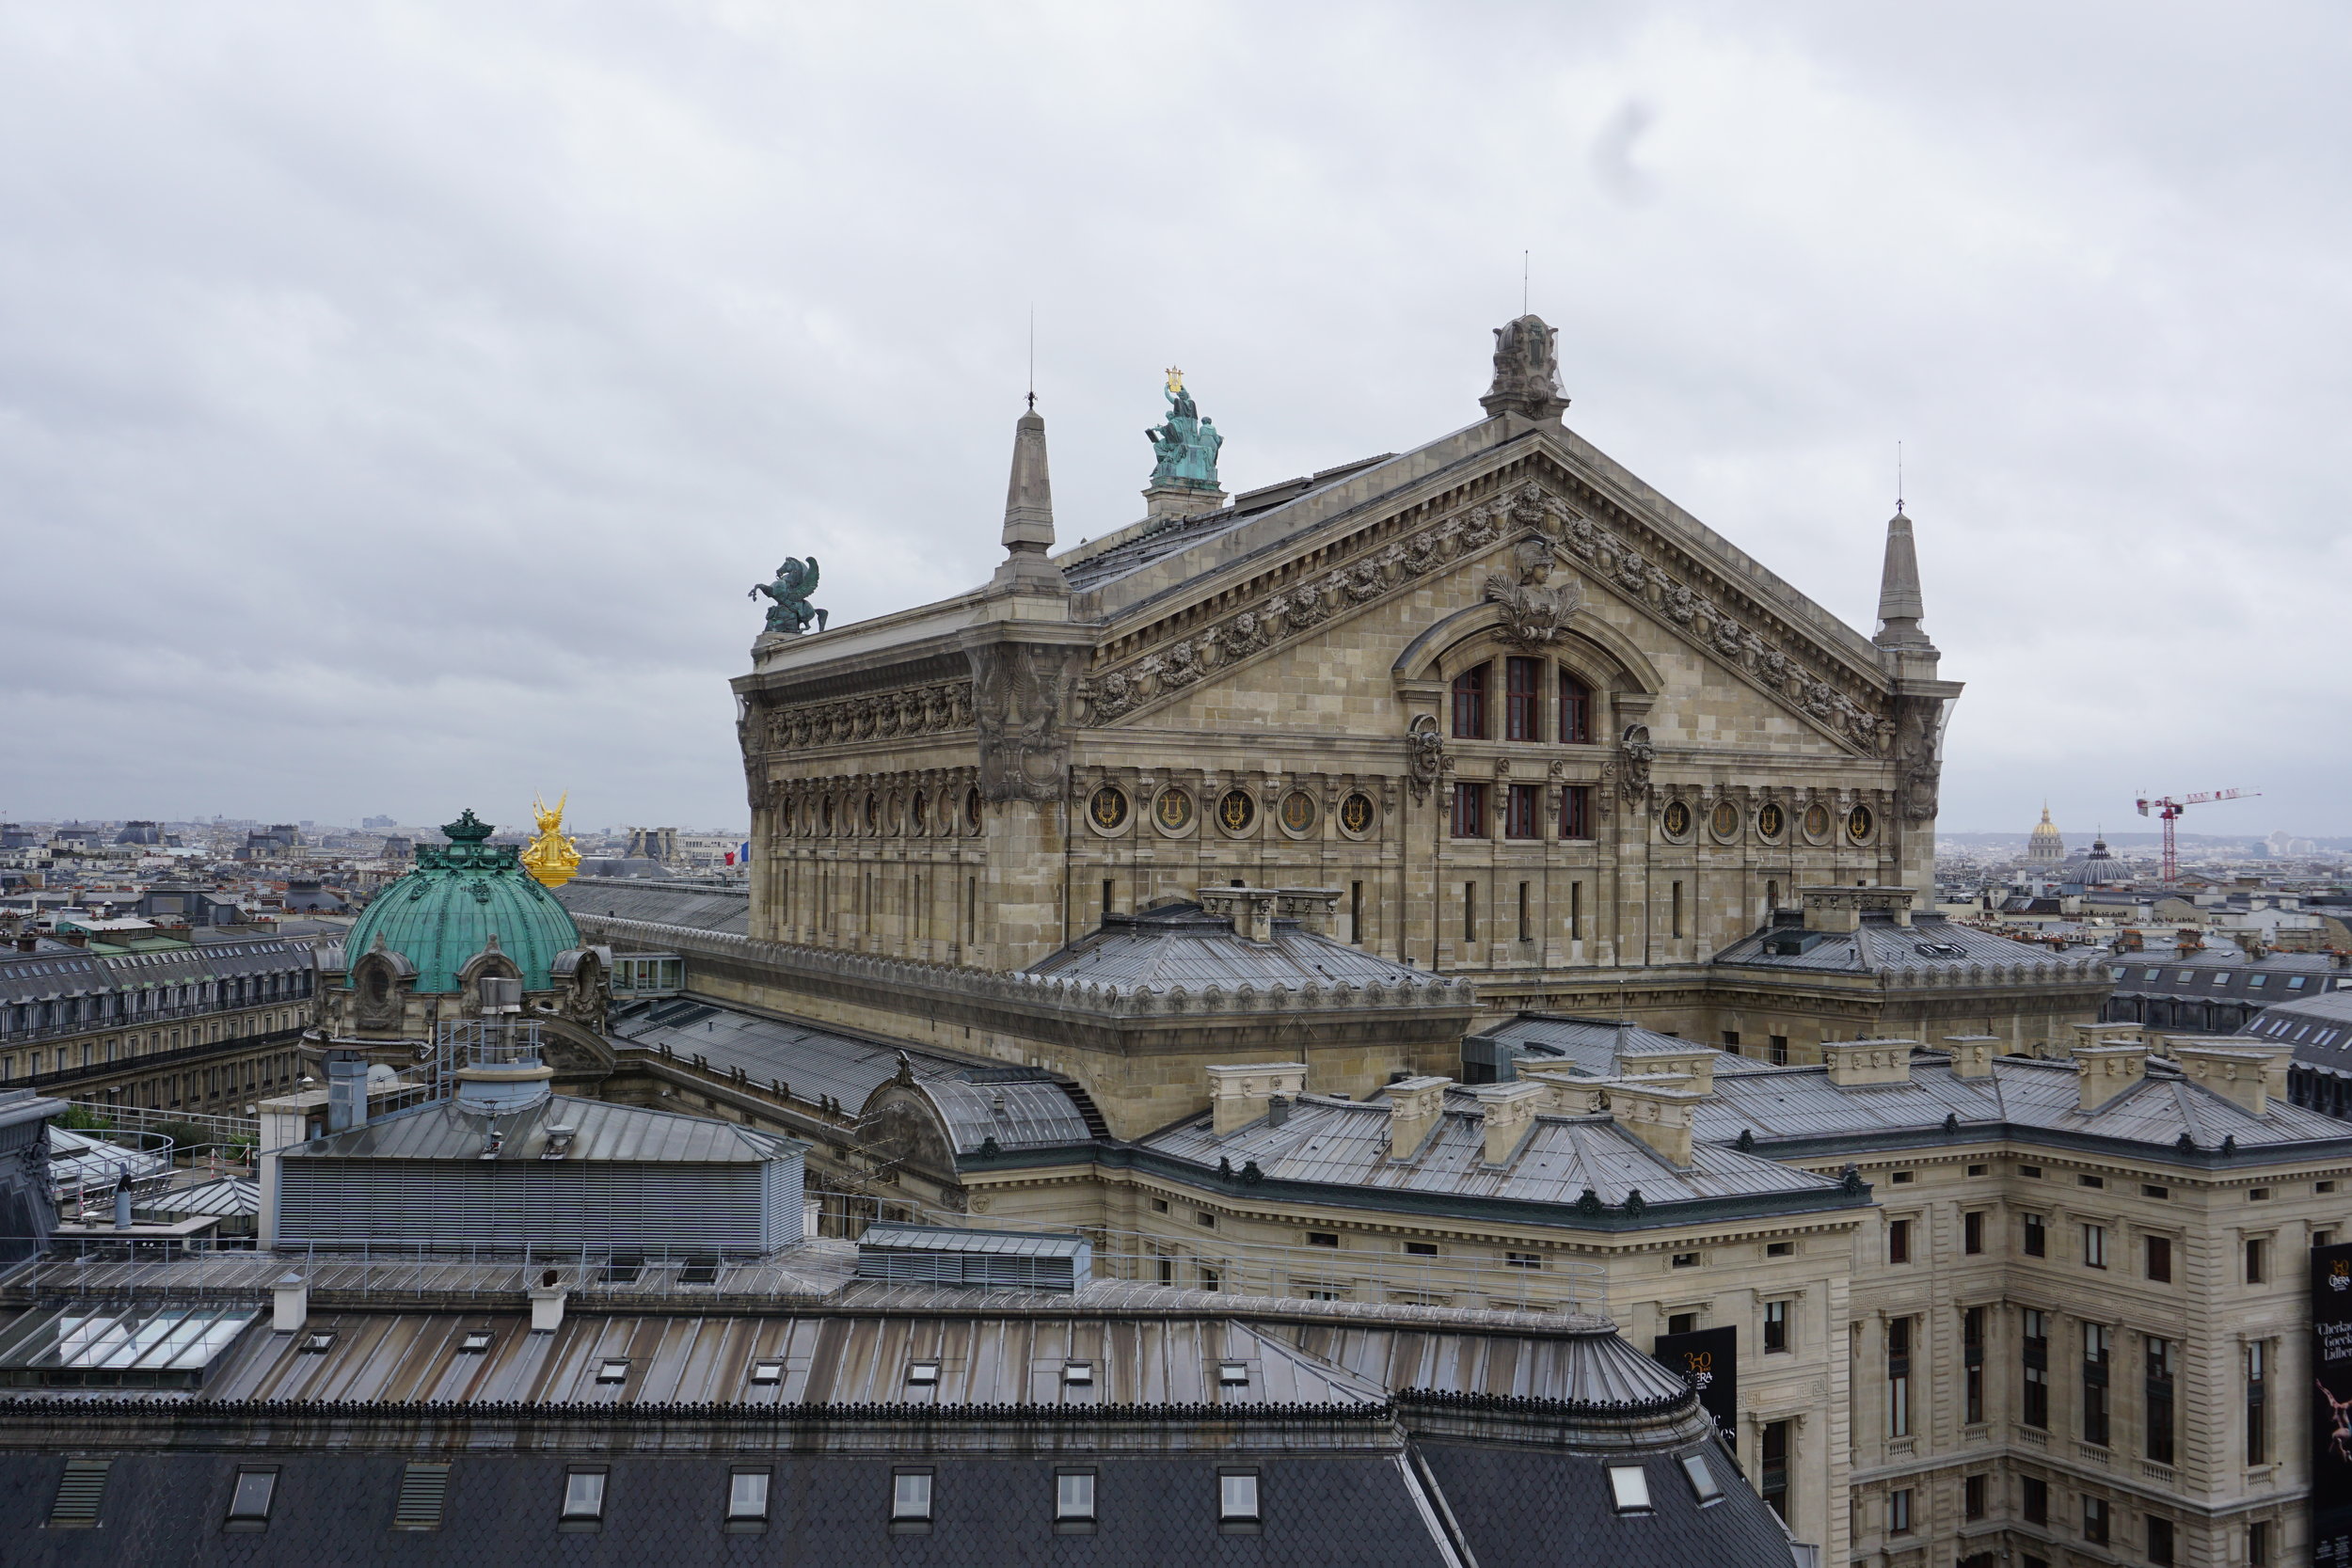  pera House from the roof of Galeries Lafayette 